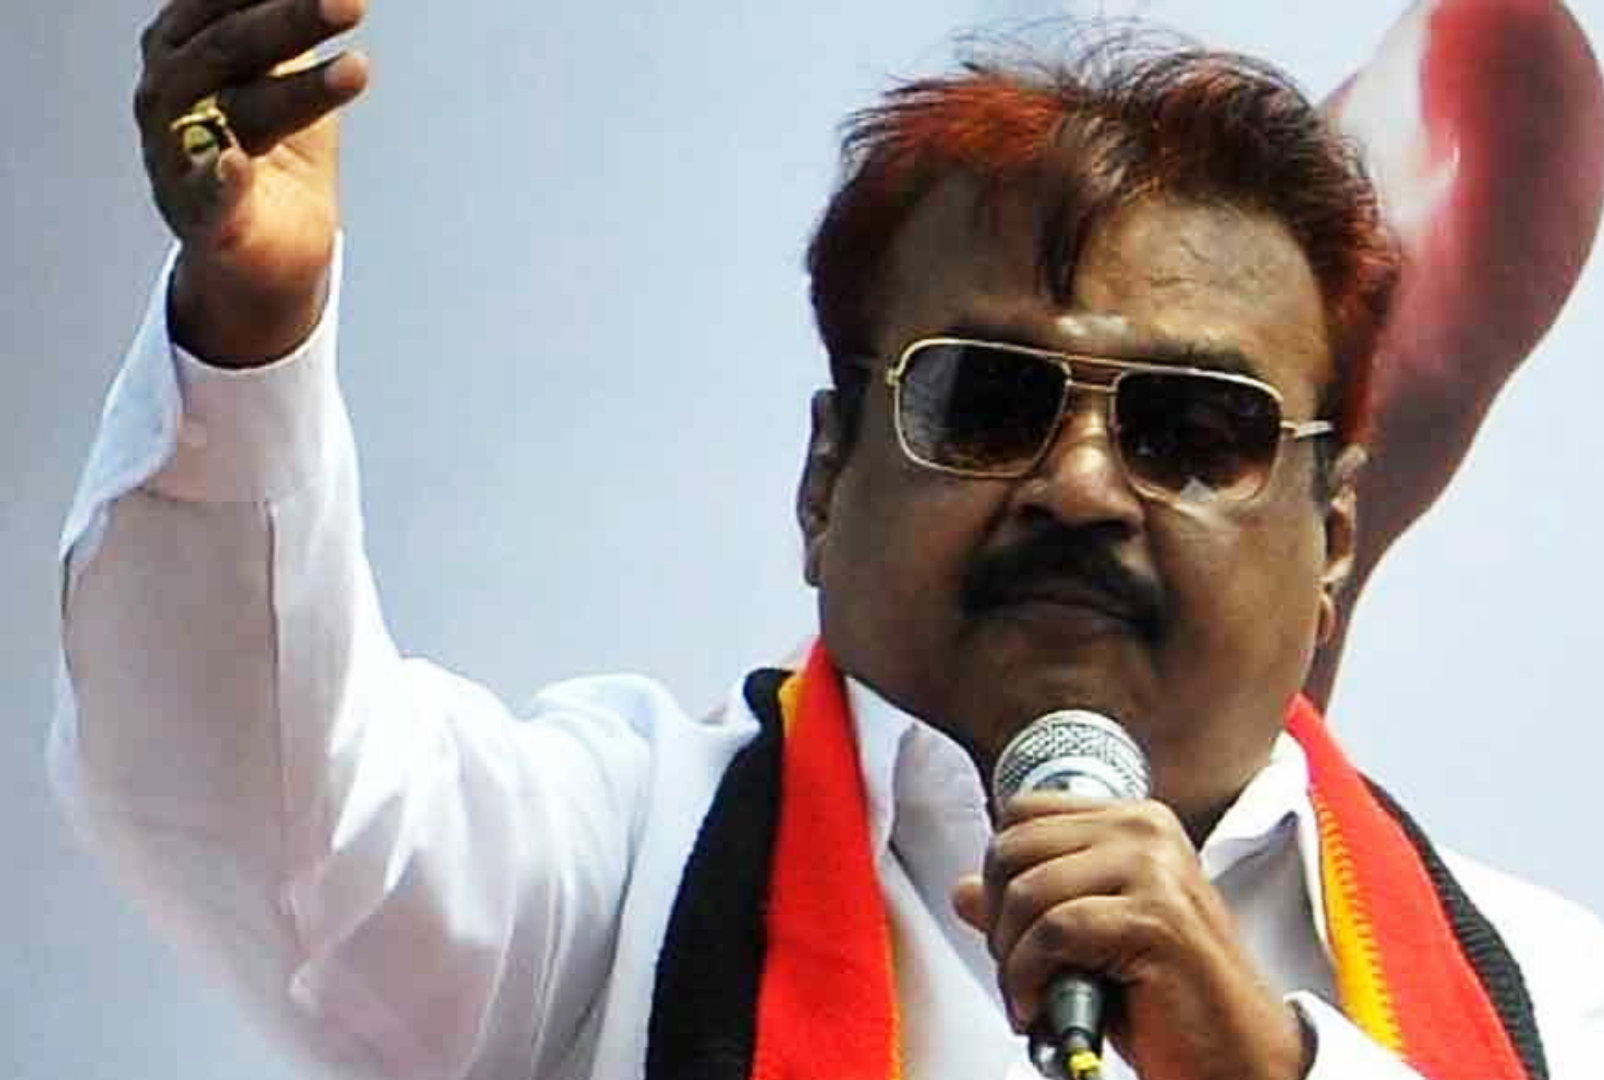 DMDK Leader Vijayakanth To Be Discharged Soon From MIOT Hospital